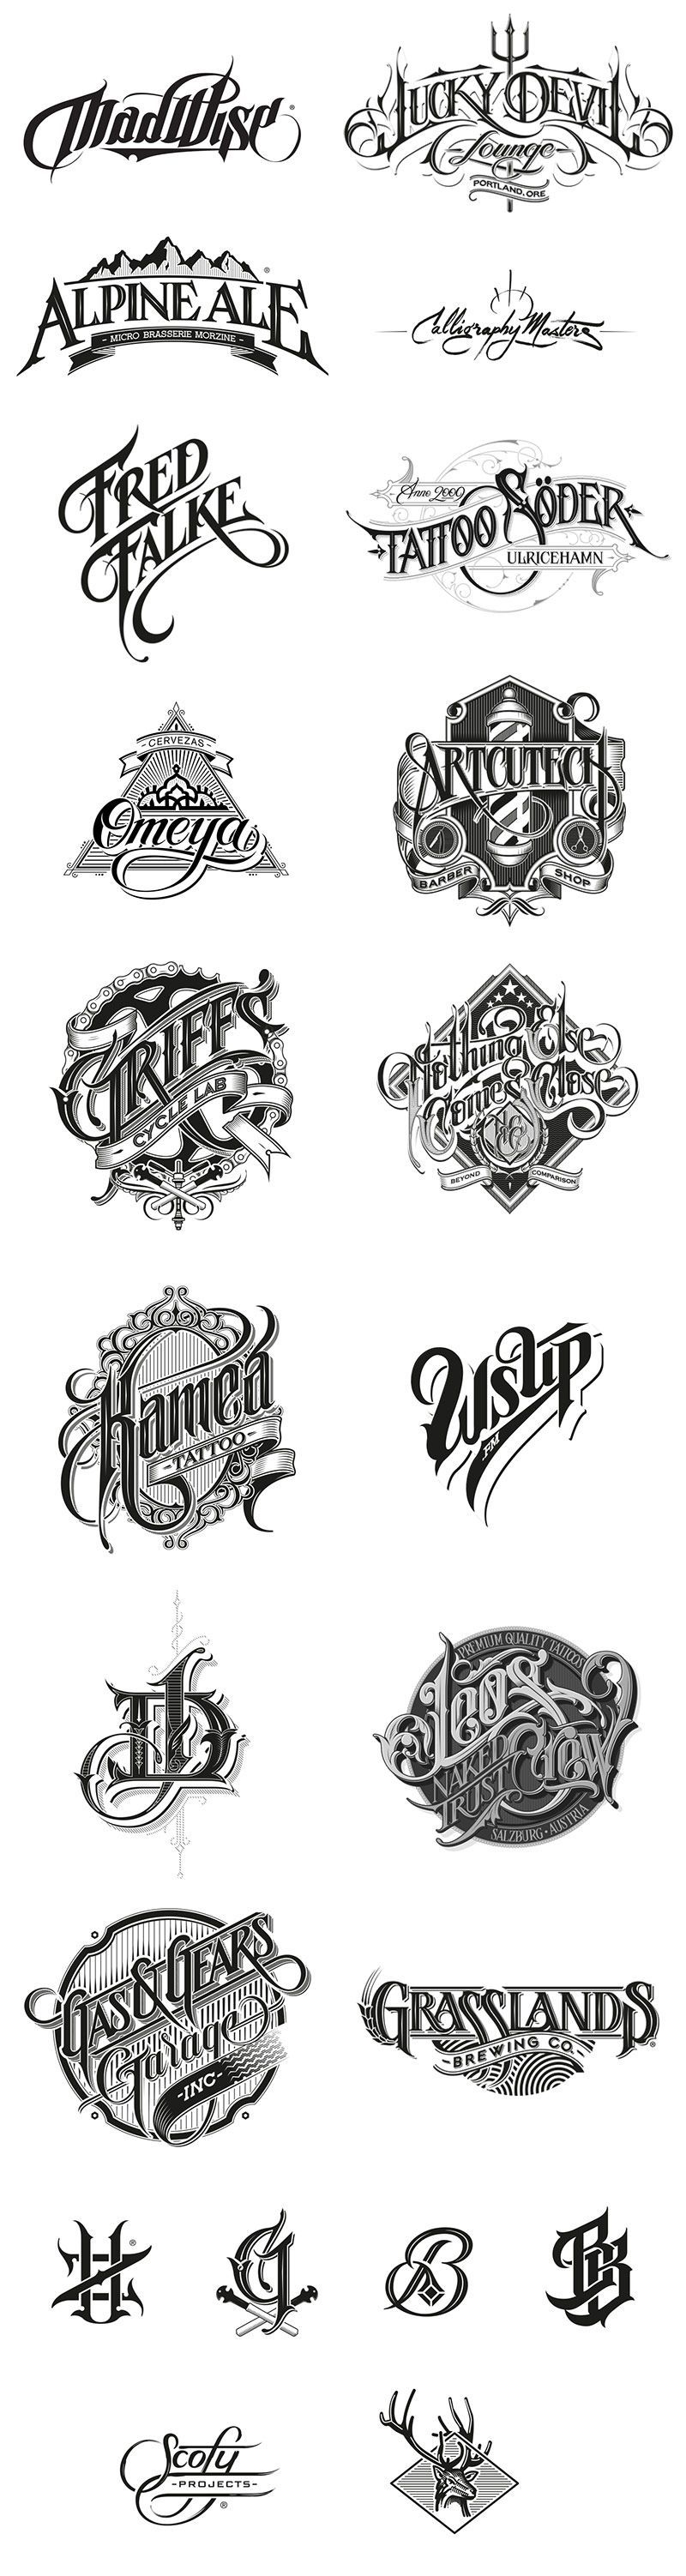 Hand-drawn logotypes, marks, and custom letterings by Martin Schmetzer. Martin Schmetzer is a Stockholm, Sweden based artist and graphic designer